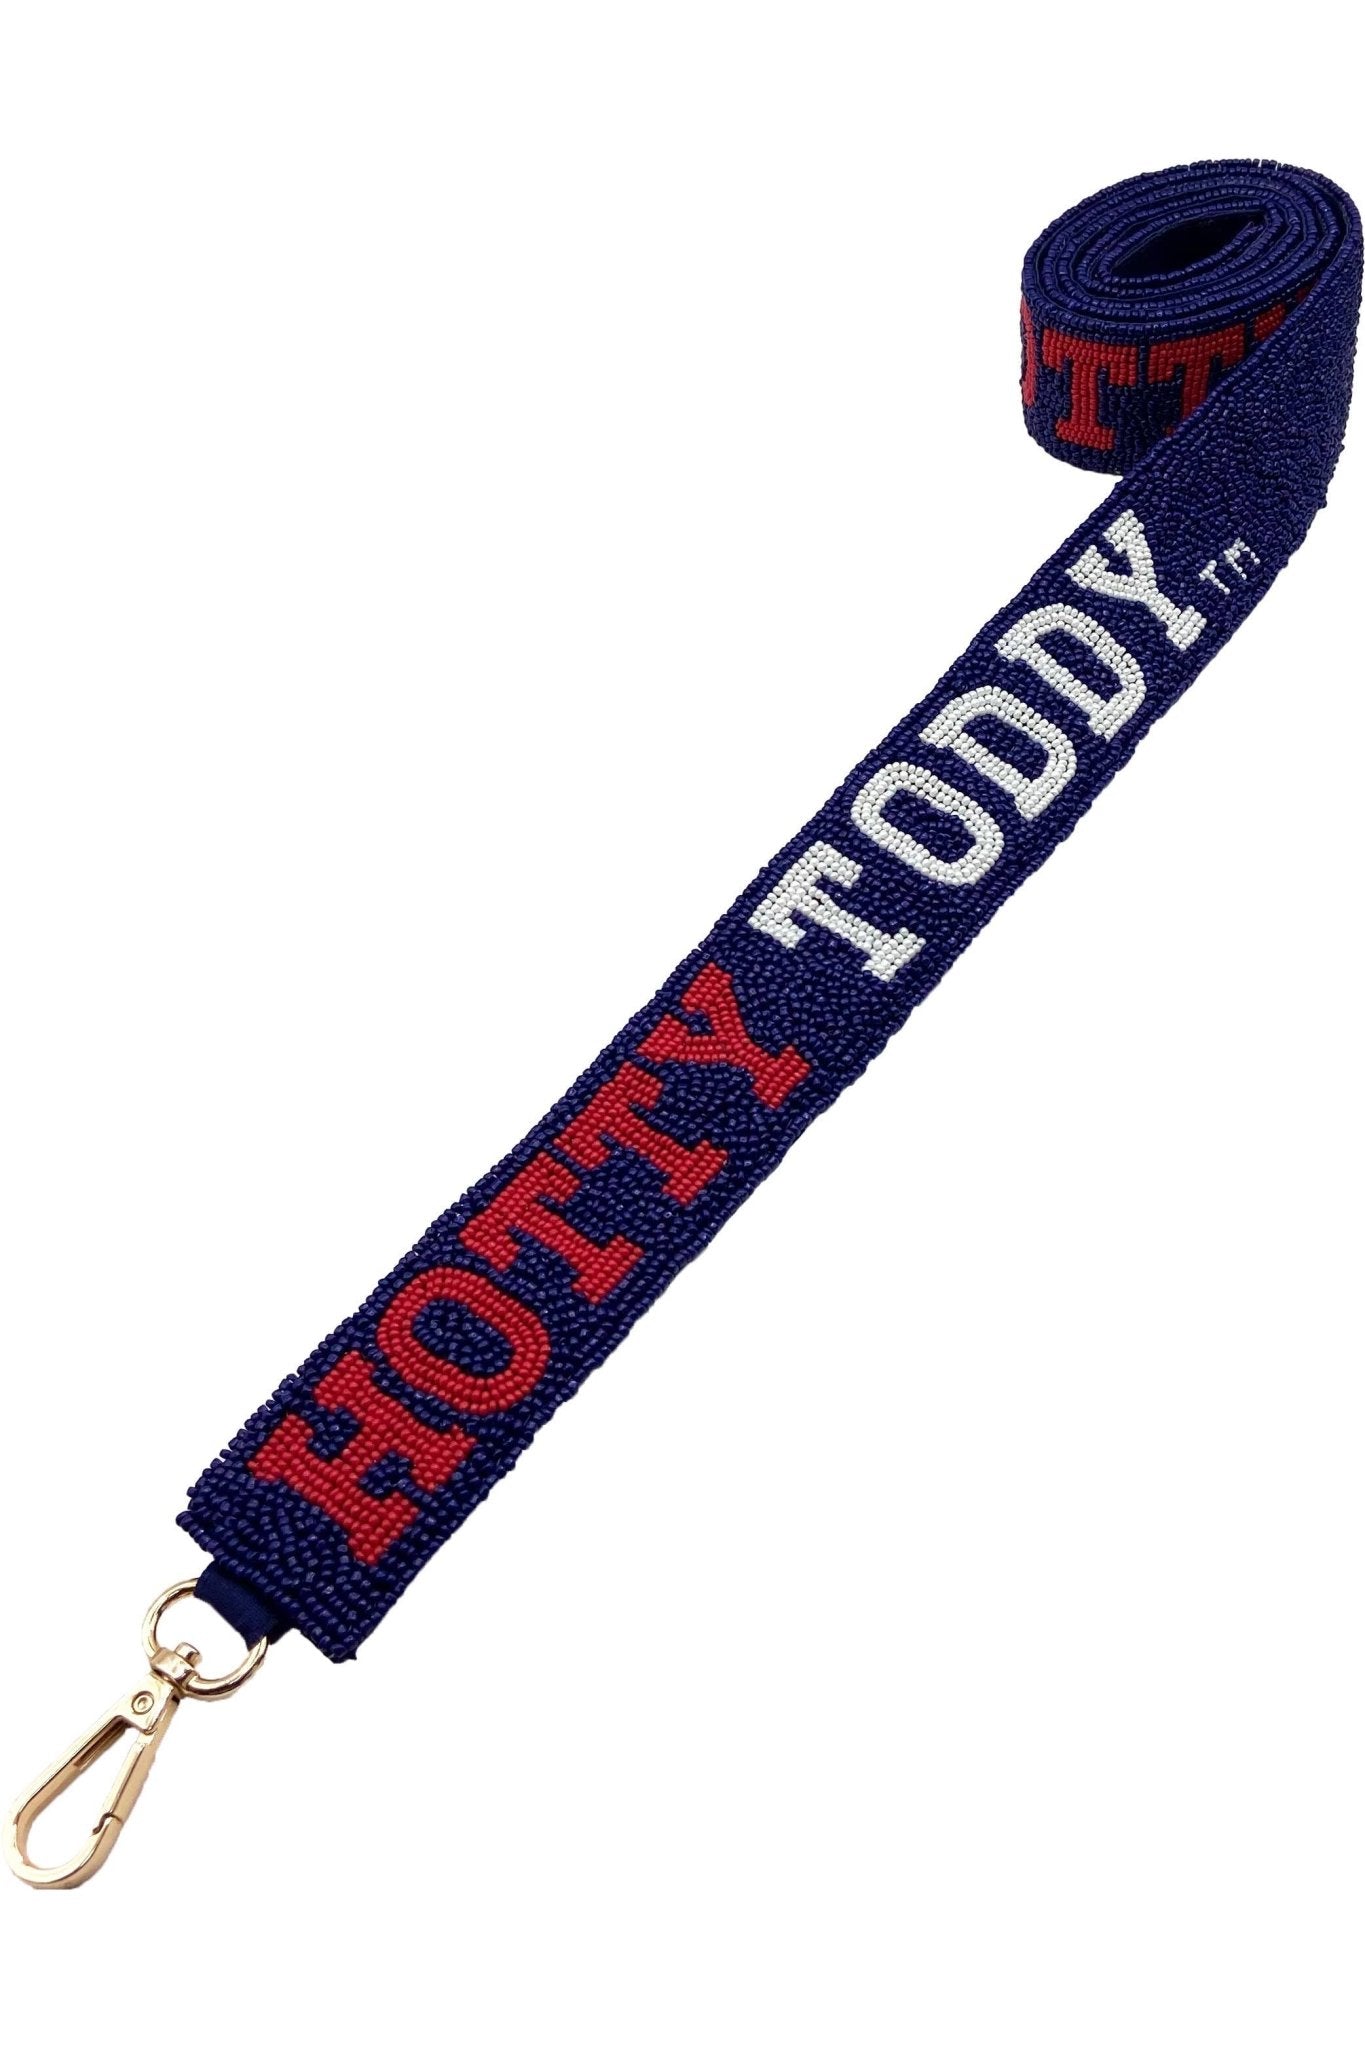 Hotty Toddy Blue + Red Beaded Bag Strap - Pizzazz, Inc. - Color Game